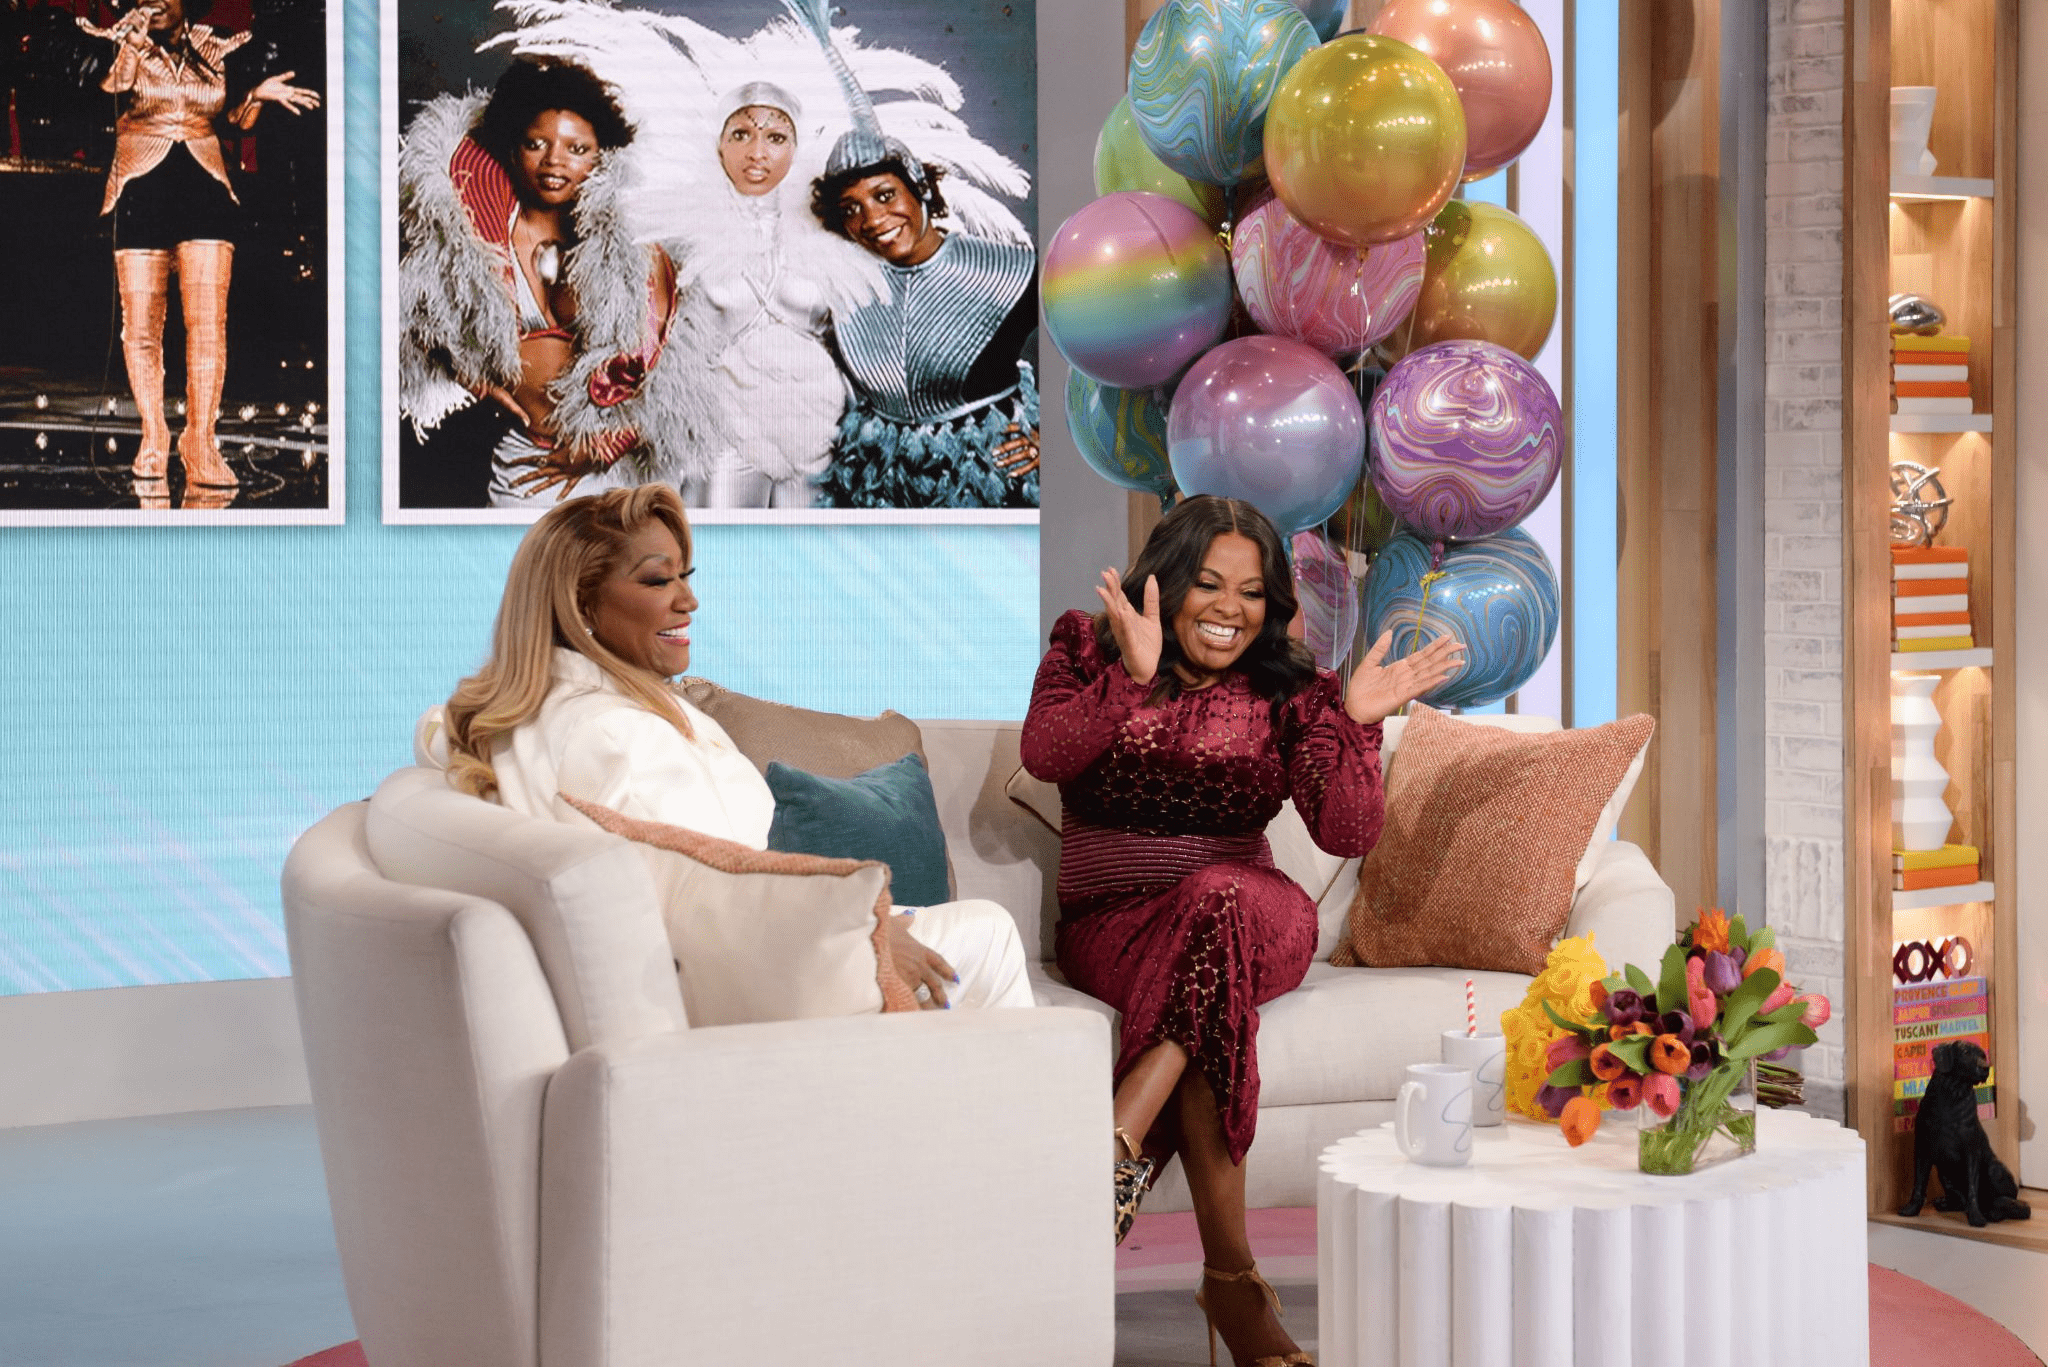 Patti LaBelle Promises New Music in 2023 And Sings Happy Birthday To Sherri!